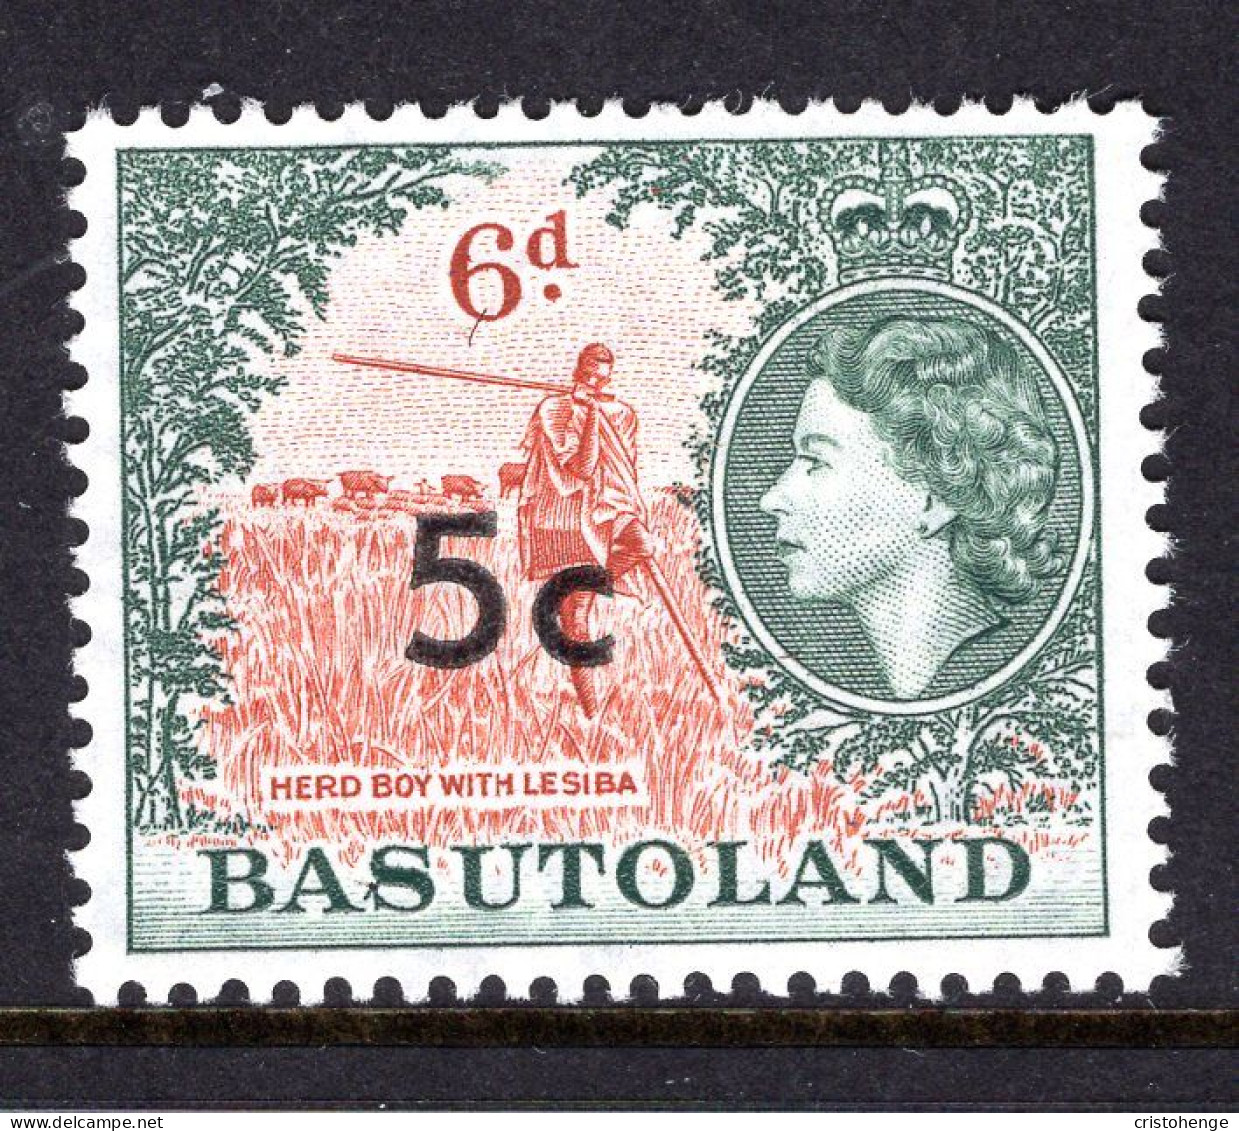 Basutoland 1961 Decimal Surcharges - 5c On 6d Herd Boy - Type I - HM (SG 63) - 1933-1964 Colonia Británica